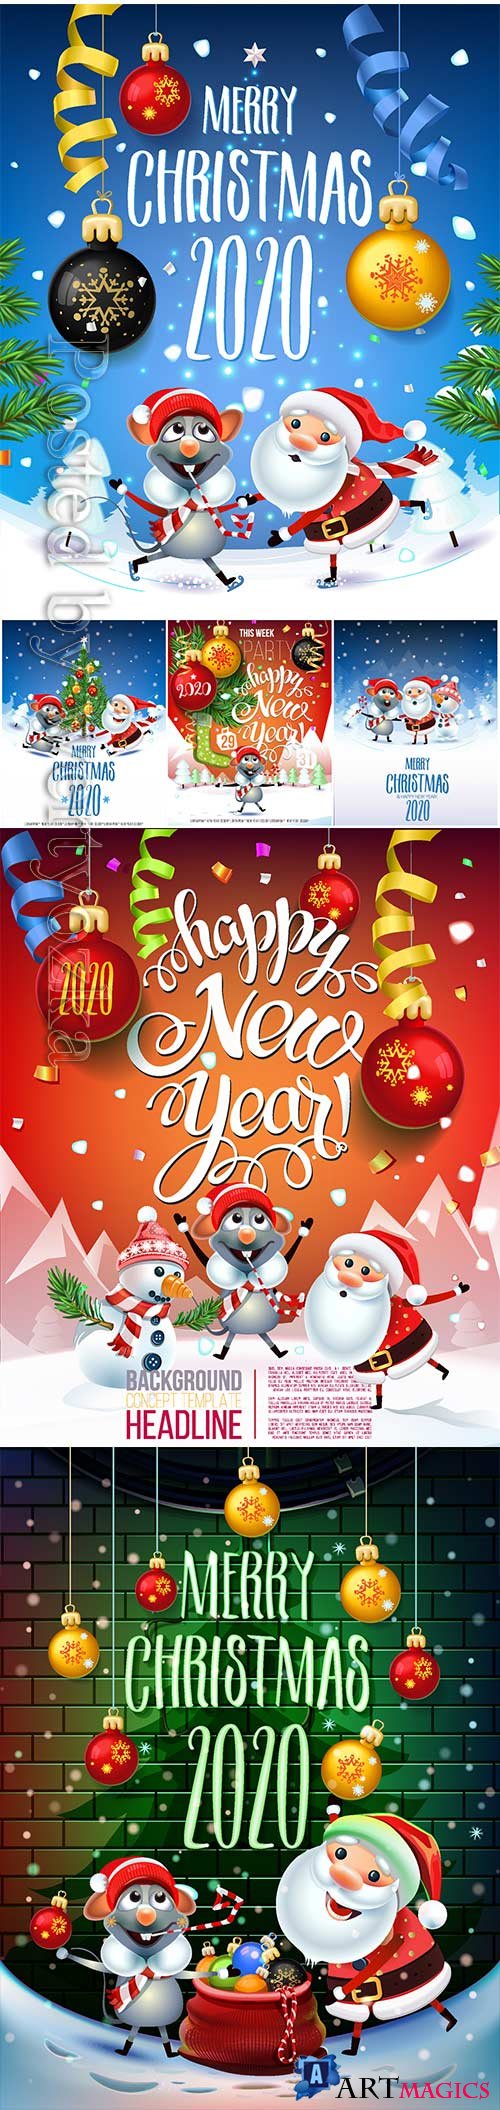 2020 Merry Chistmas and Happy New Year vector illustration # 8